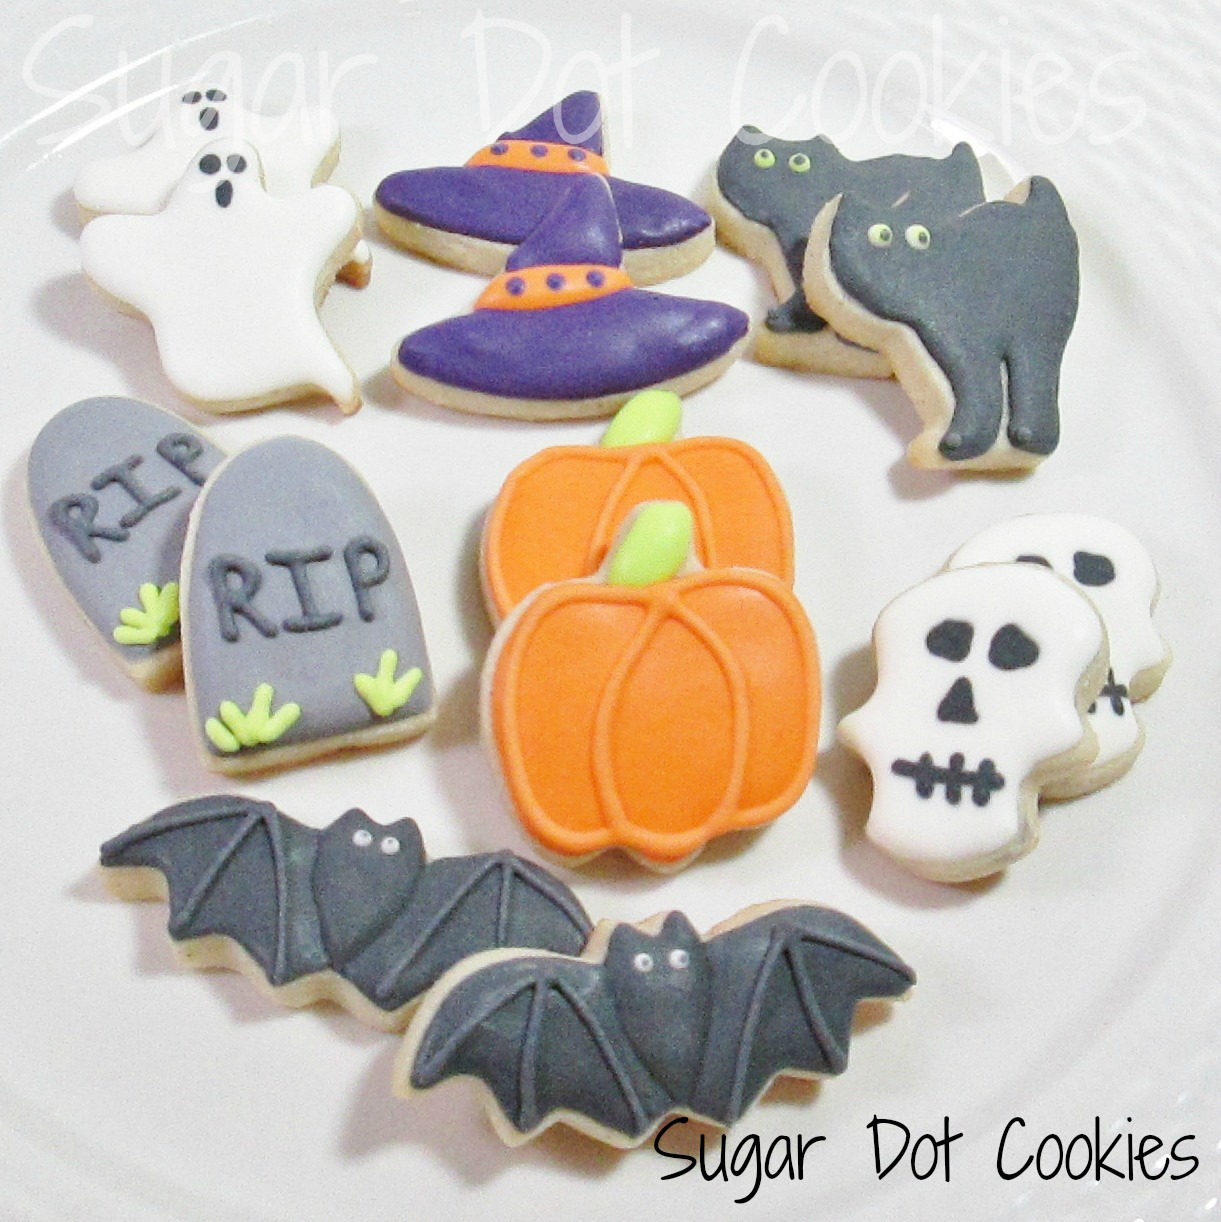 Halloween Cookies Royal Icing
 These were super fun Monster cupcakes Ha I got the